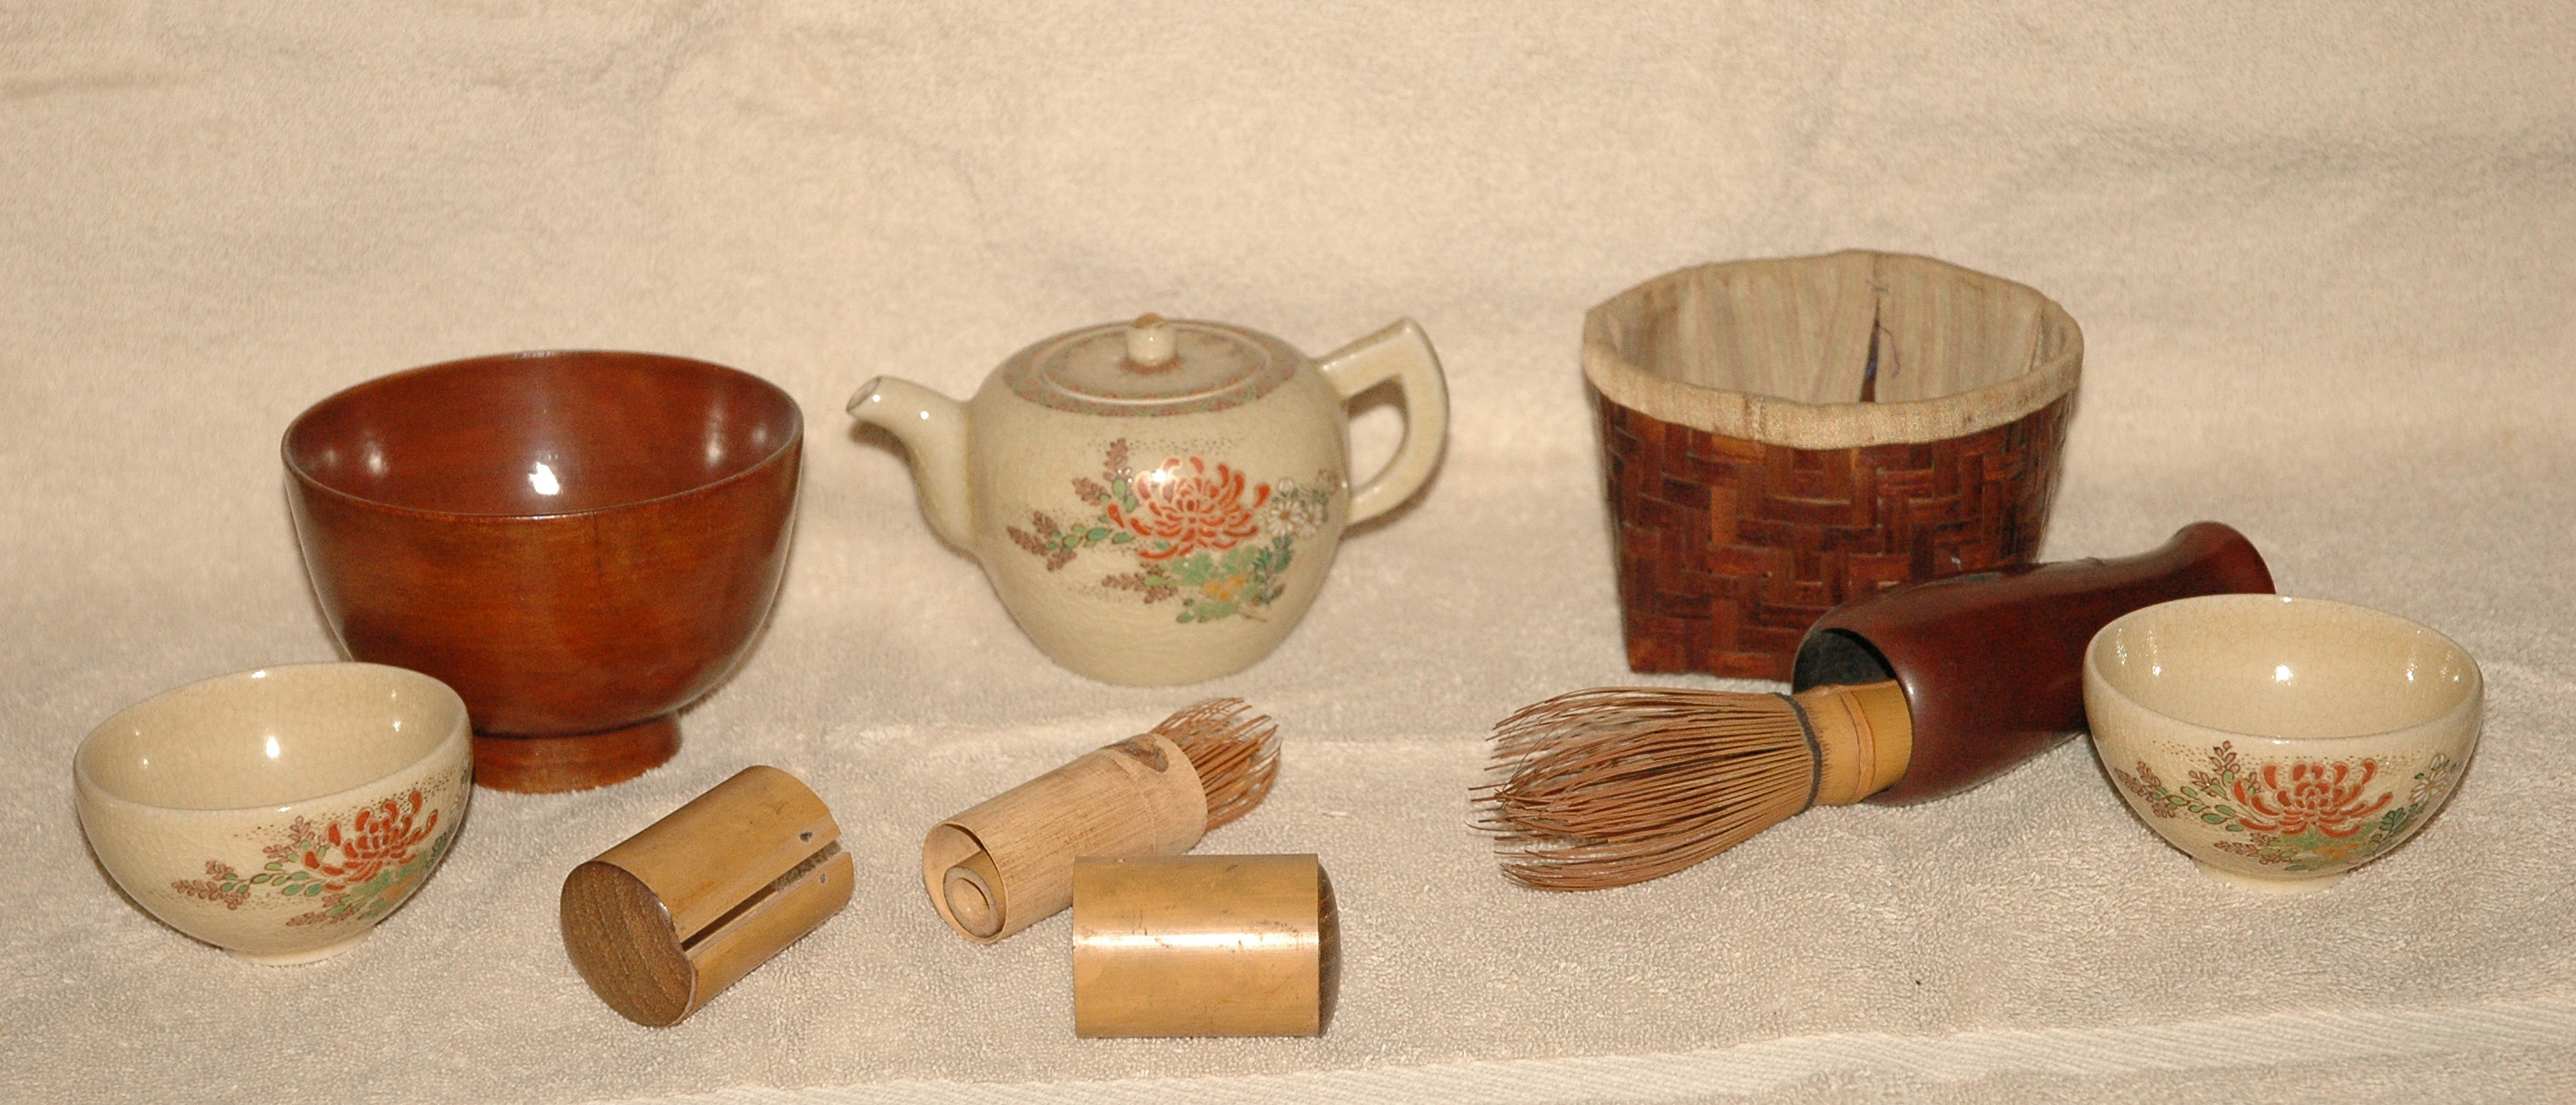 Yamashita's tea service, now in the collection of the Clarke family